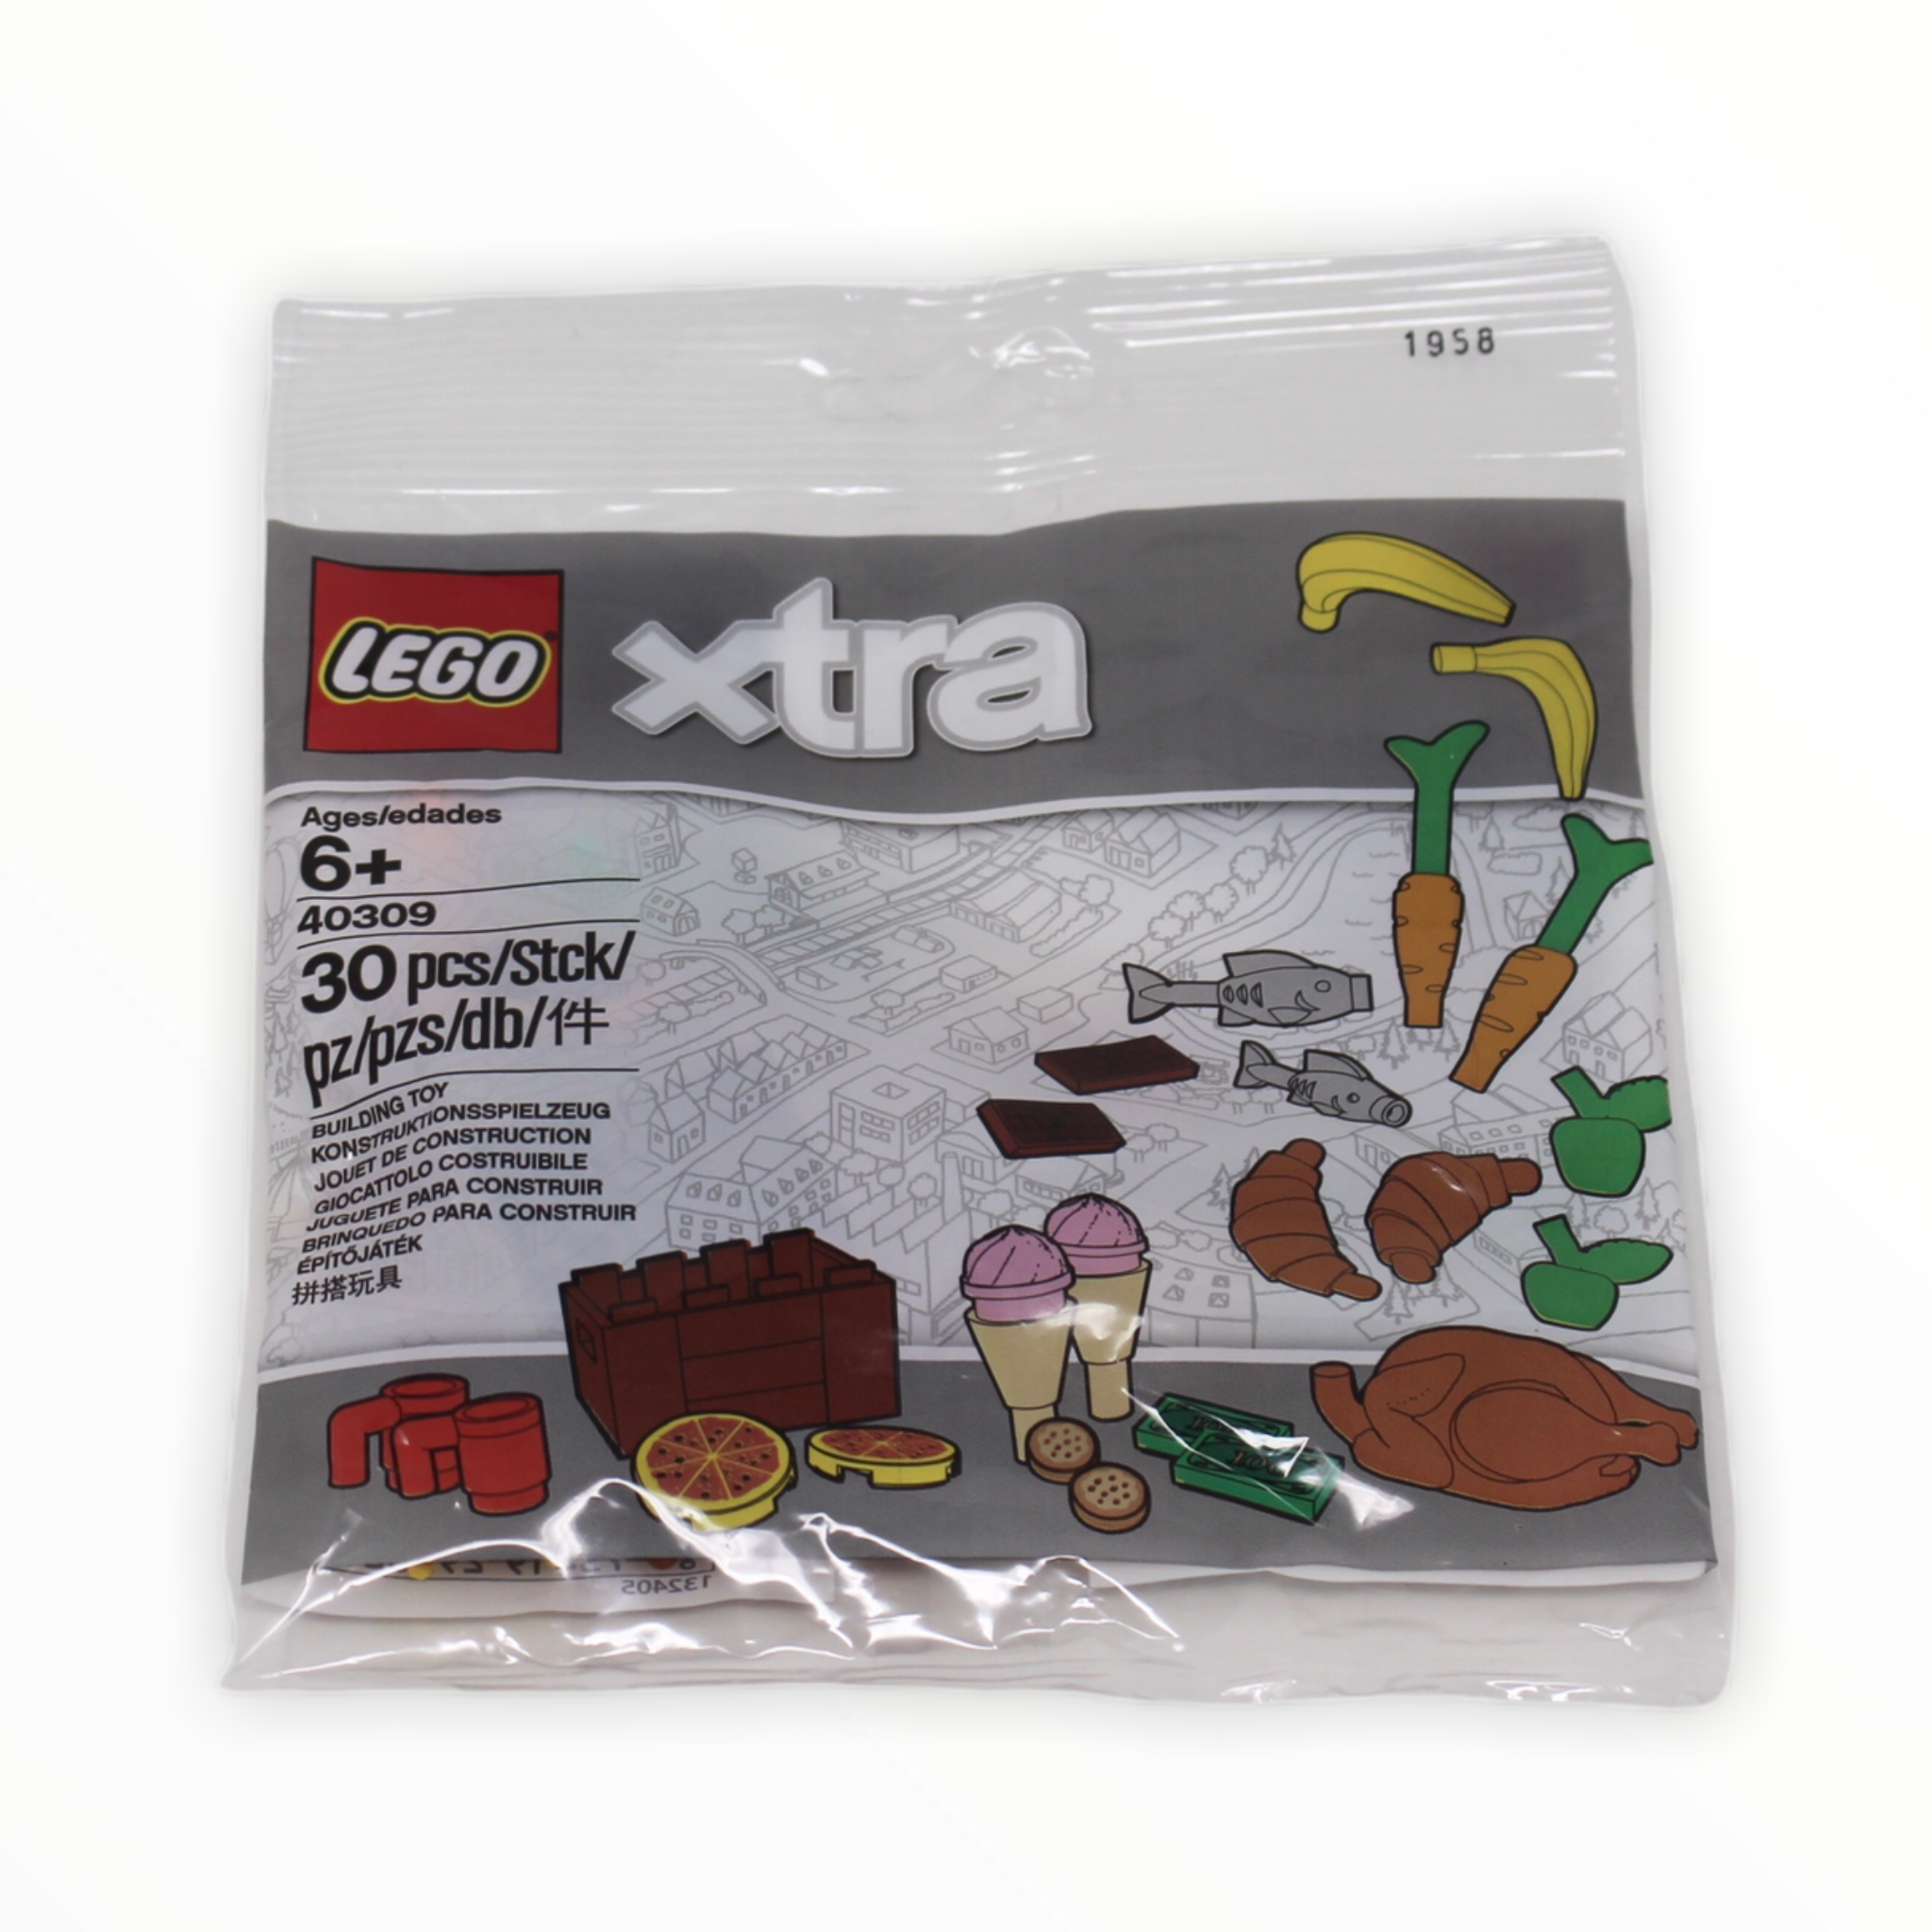 Polybag 40309 LEGO xtra Food Accessories